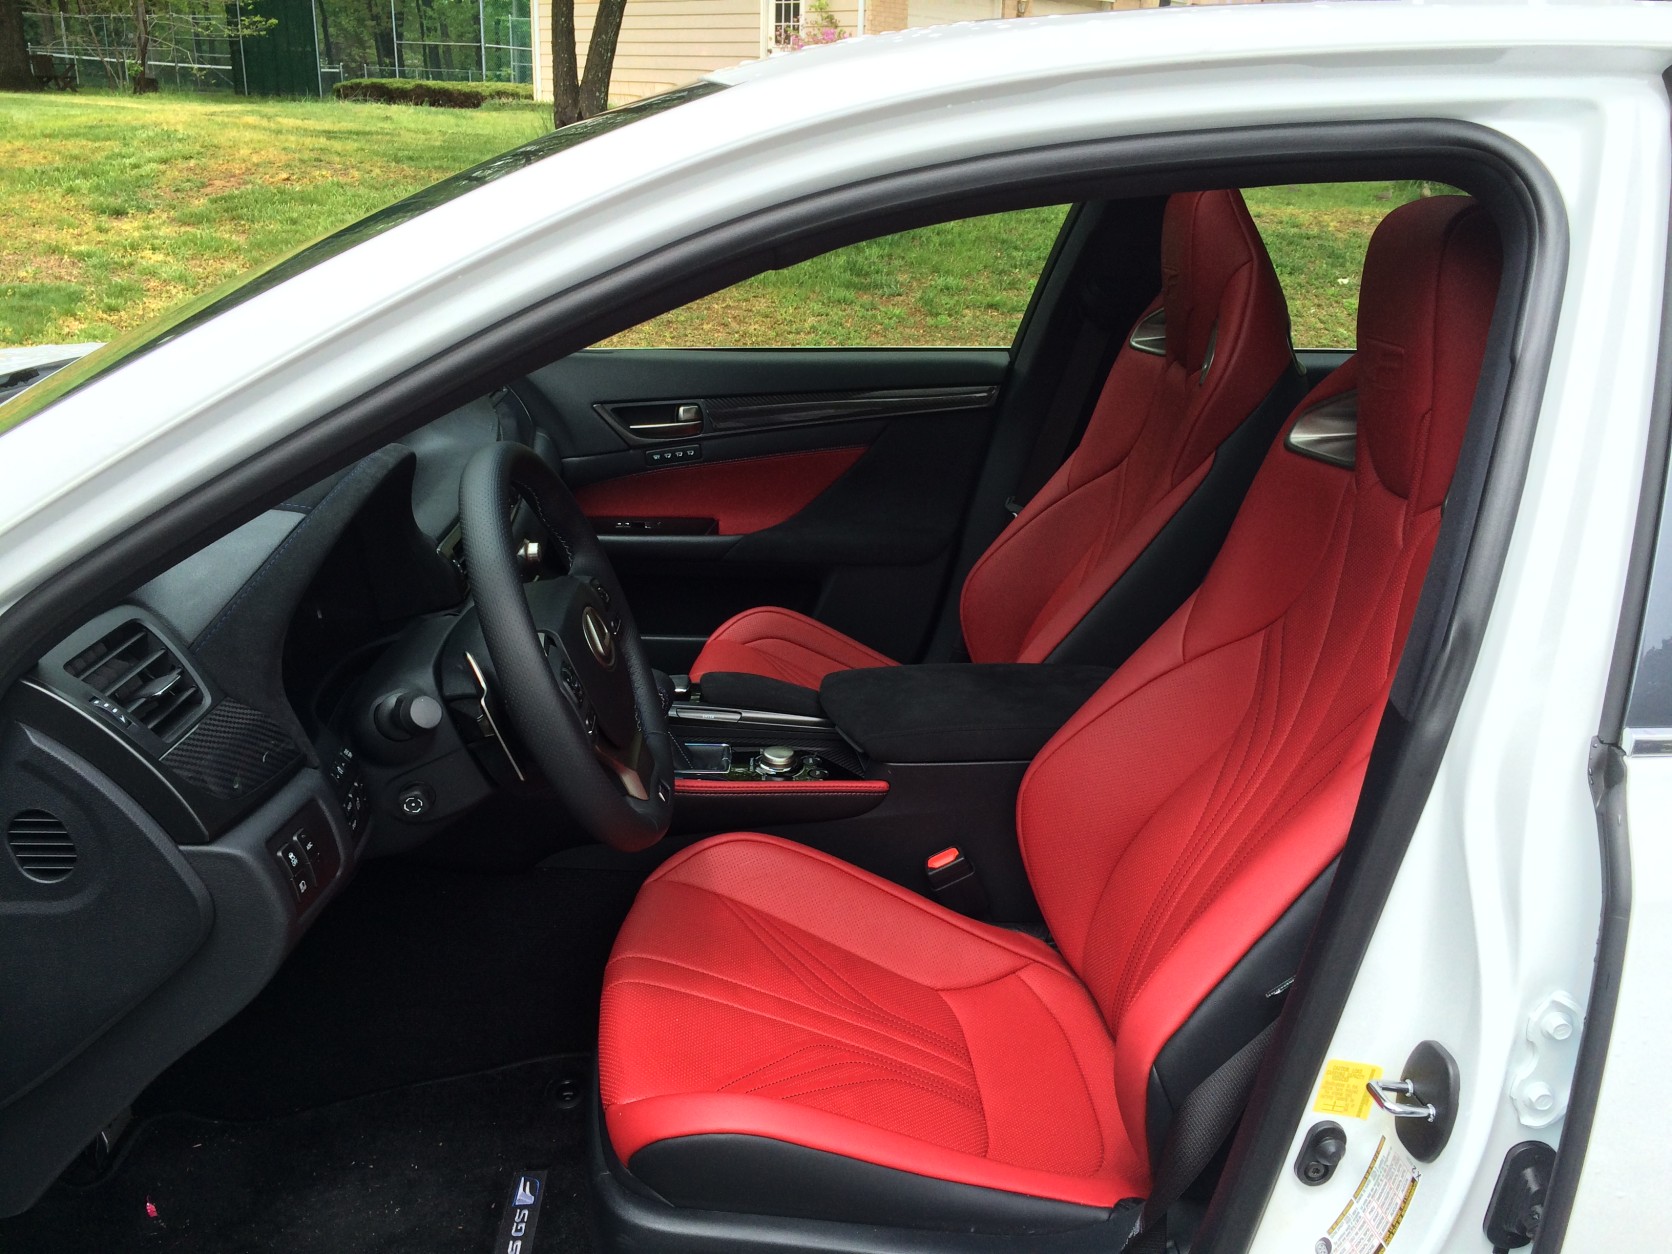 One place that is still all luxury is the interior with leather seats that look sporty but are very comfortable. (WTOP/Mike Parris)